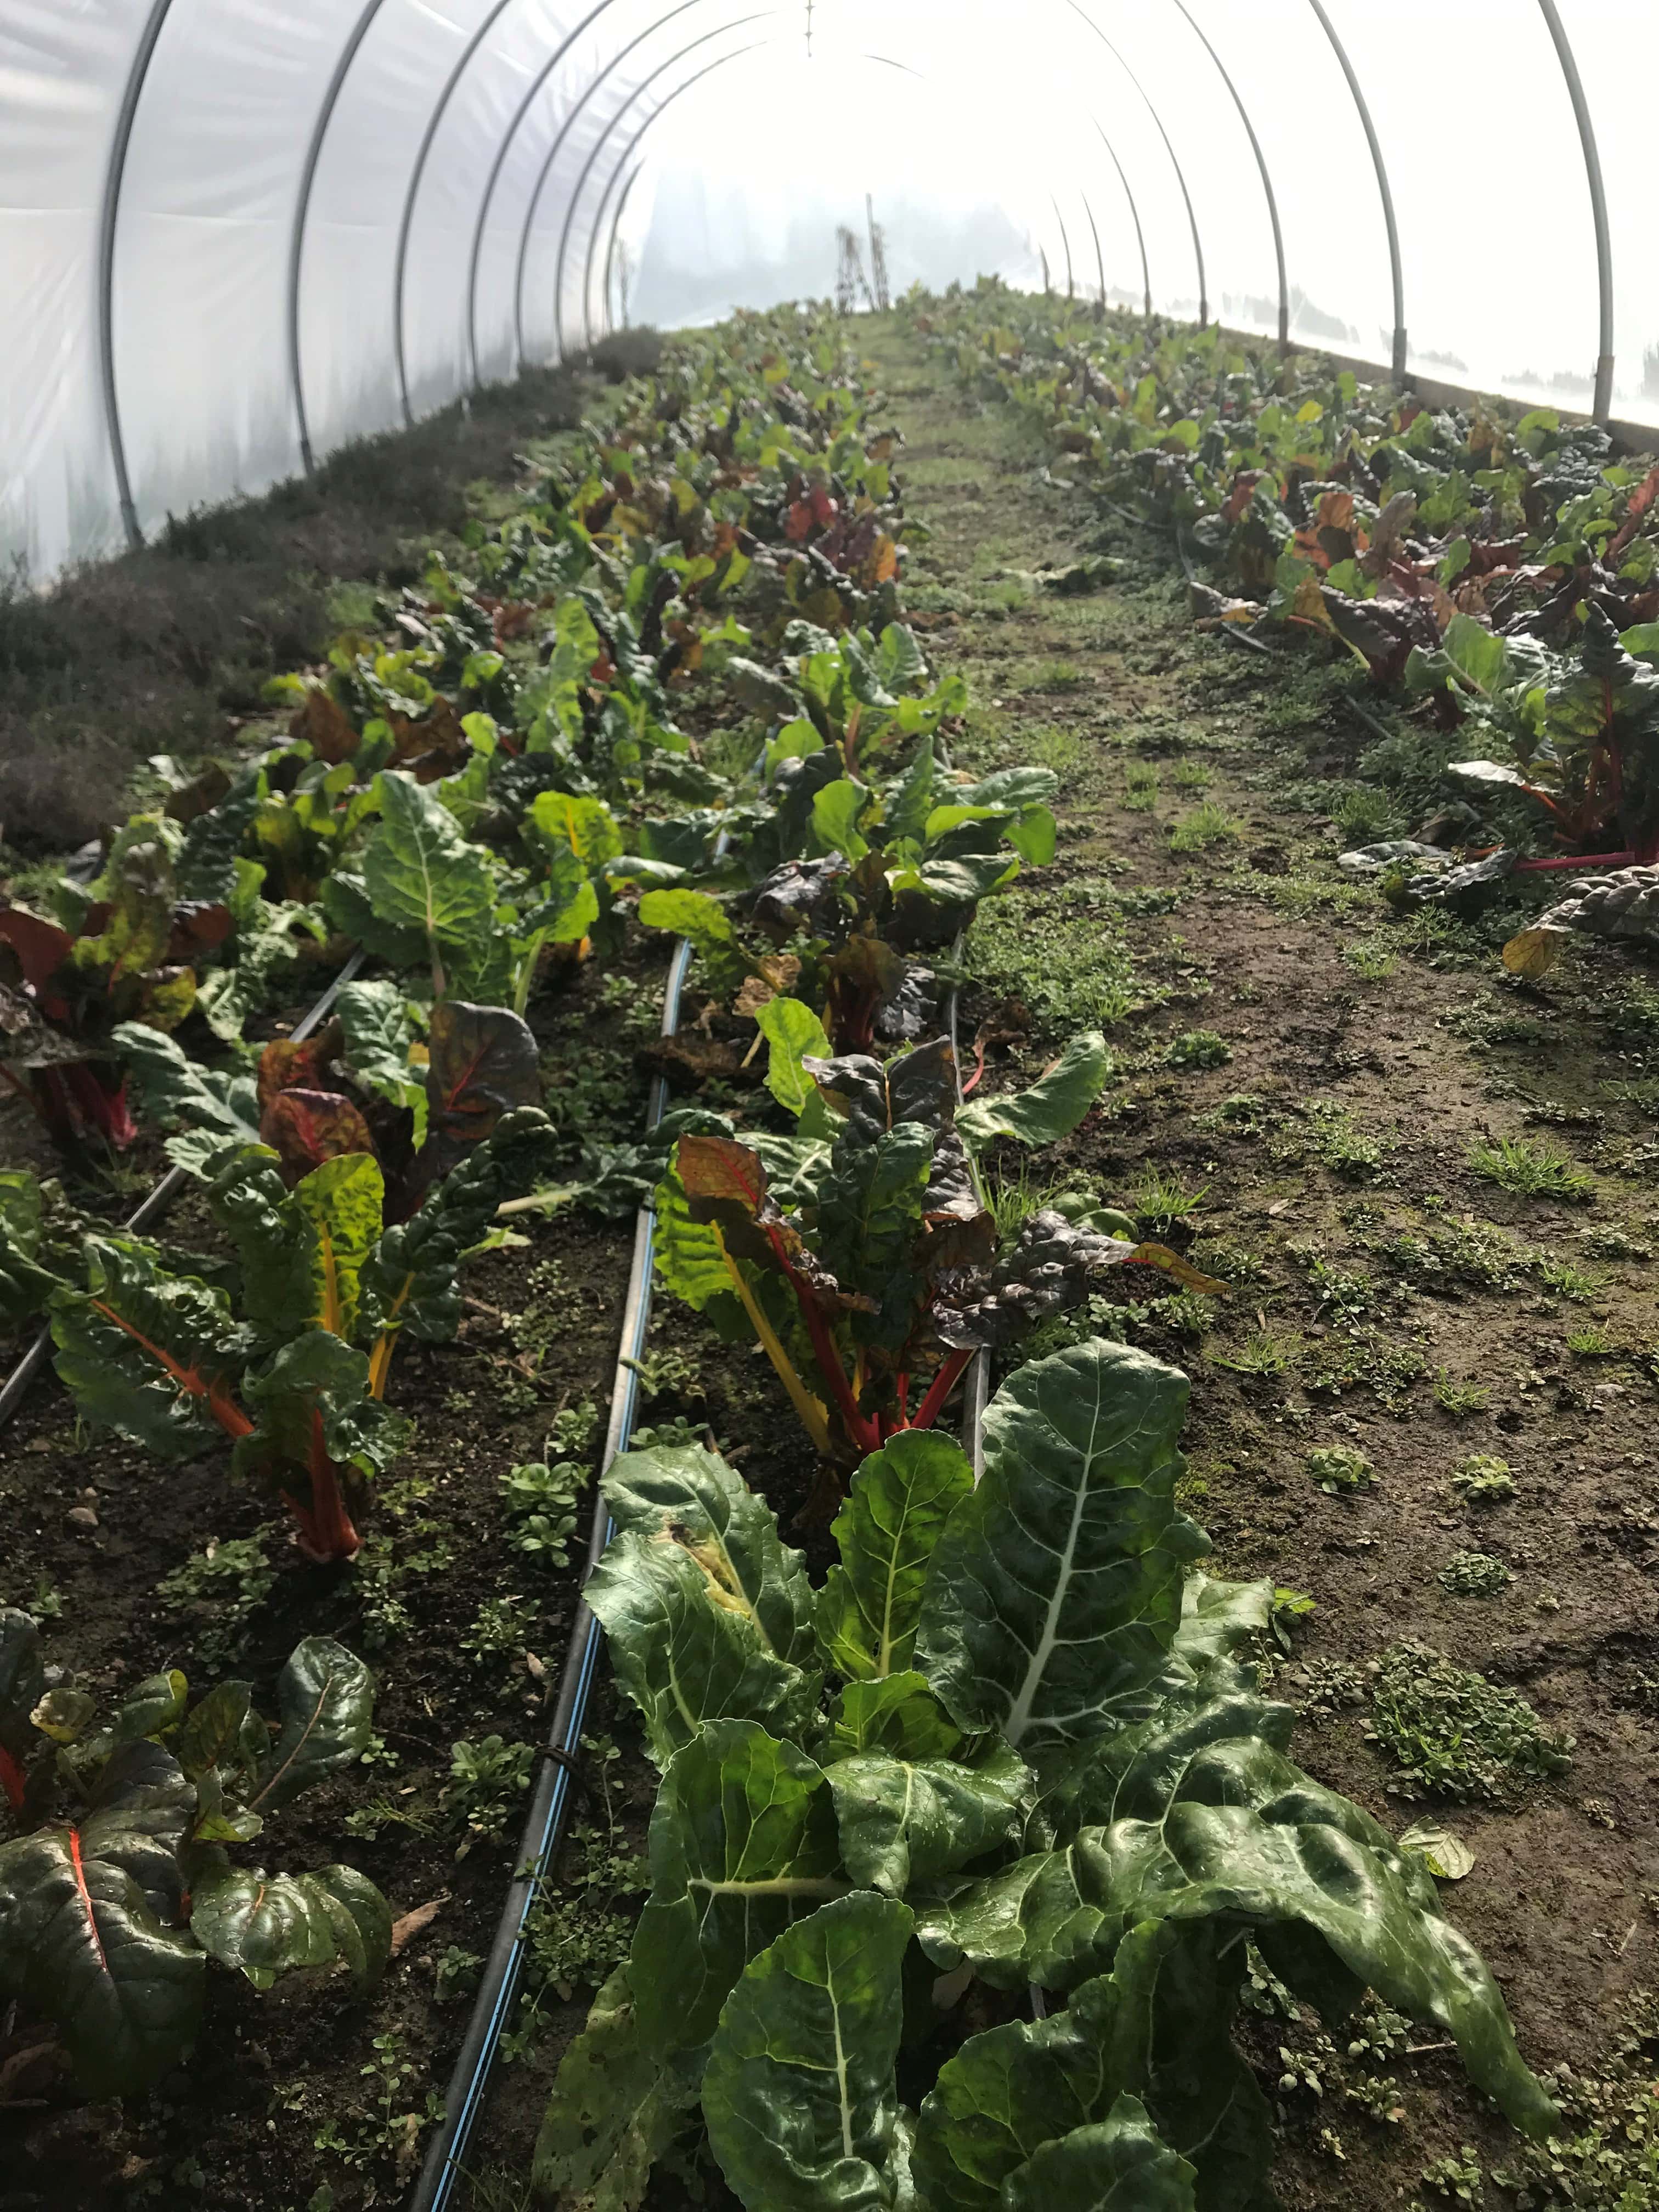 Swiss chard growing in a high tunnel